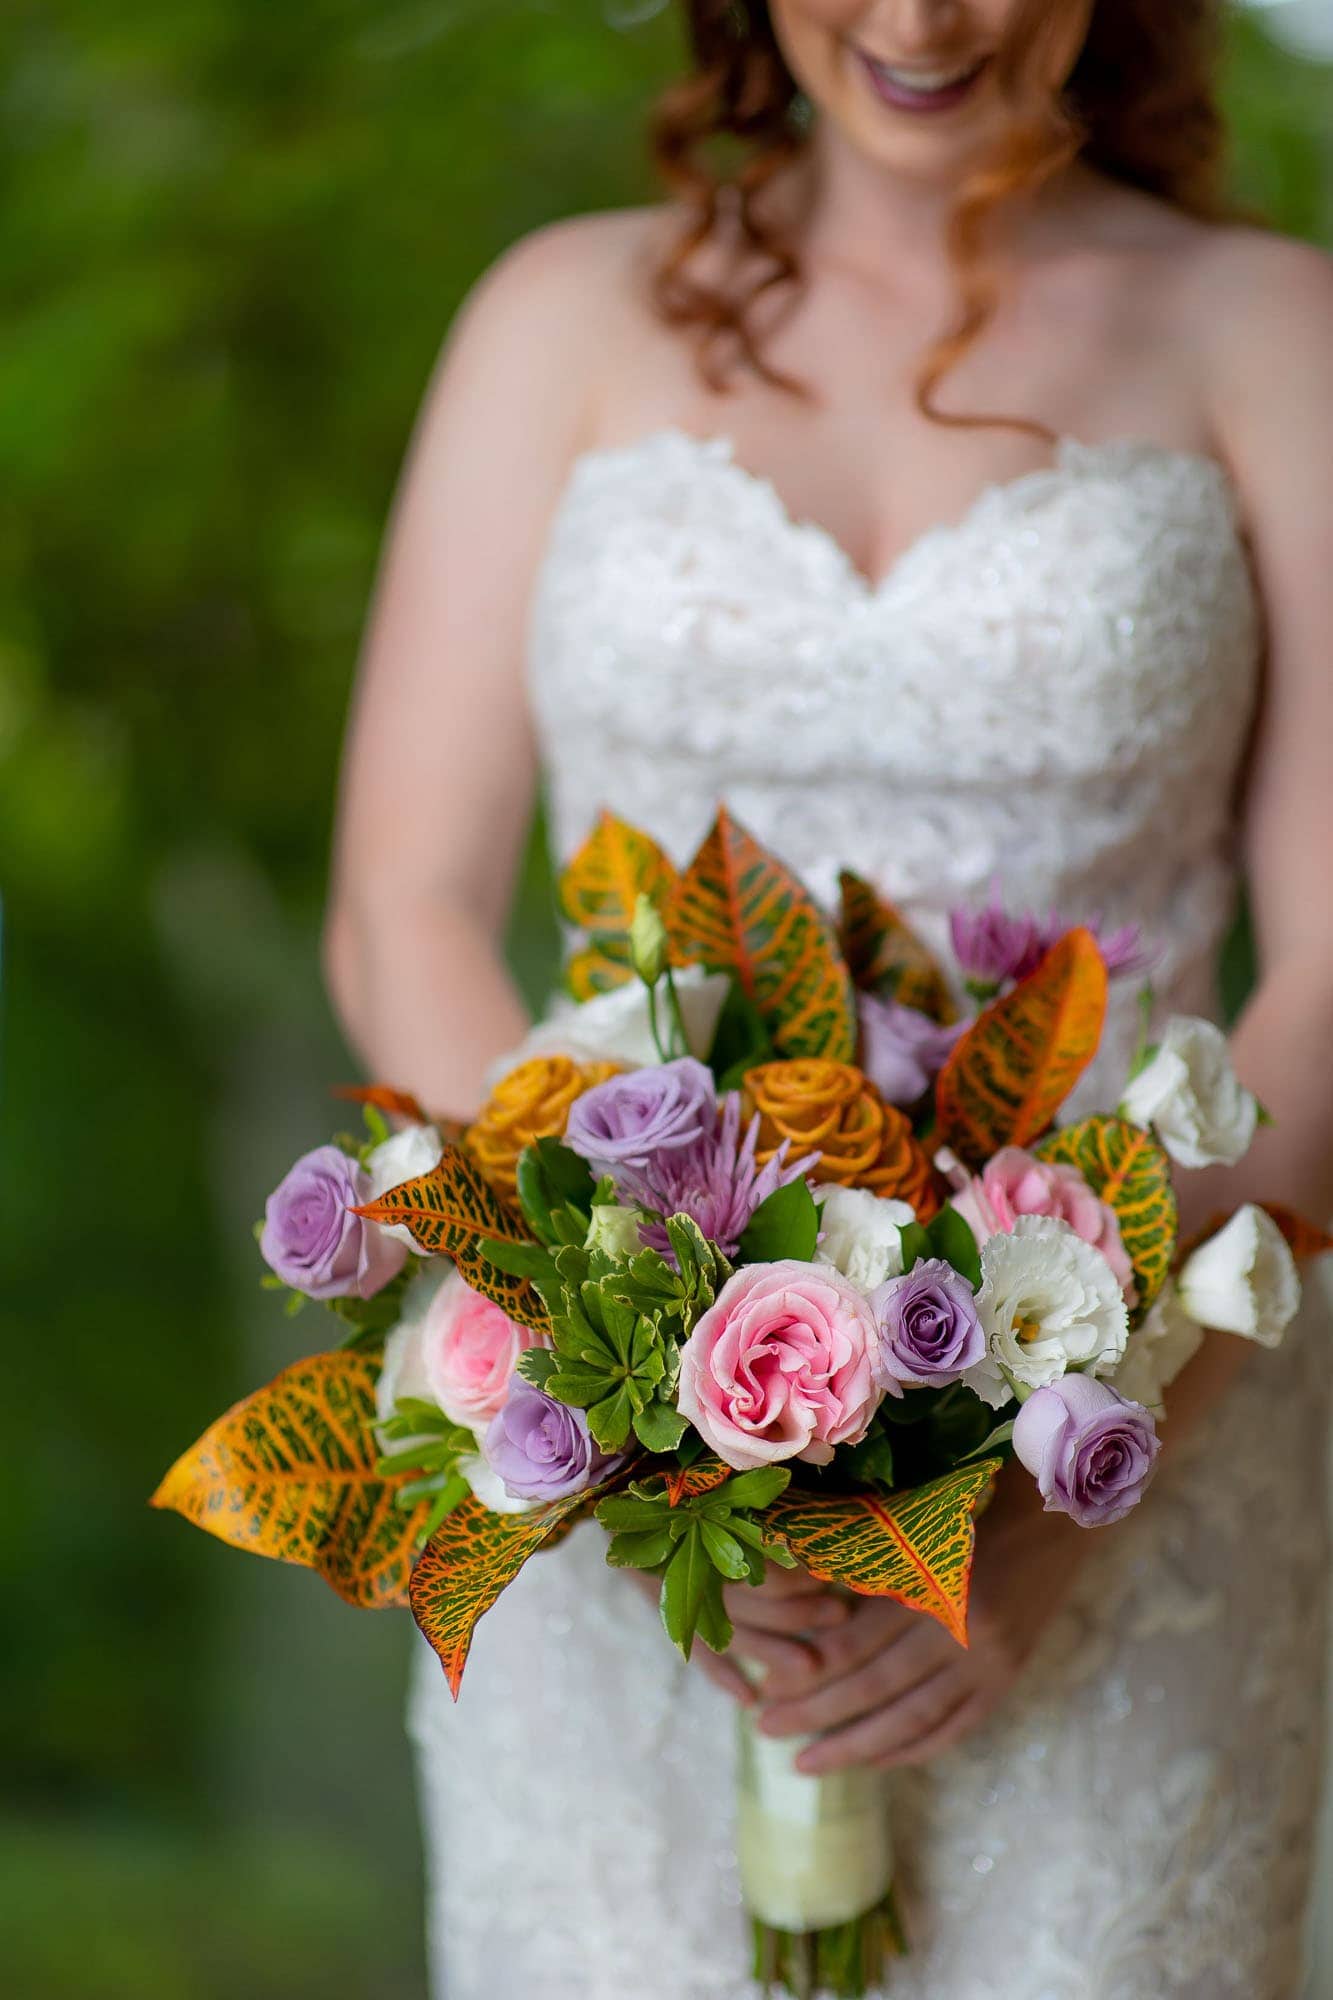 Closeup on the bride's flowers